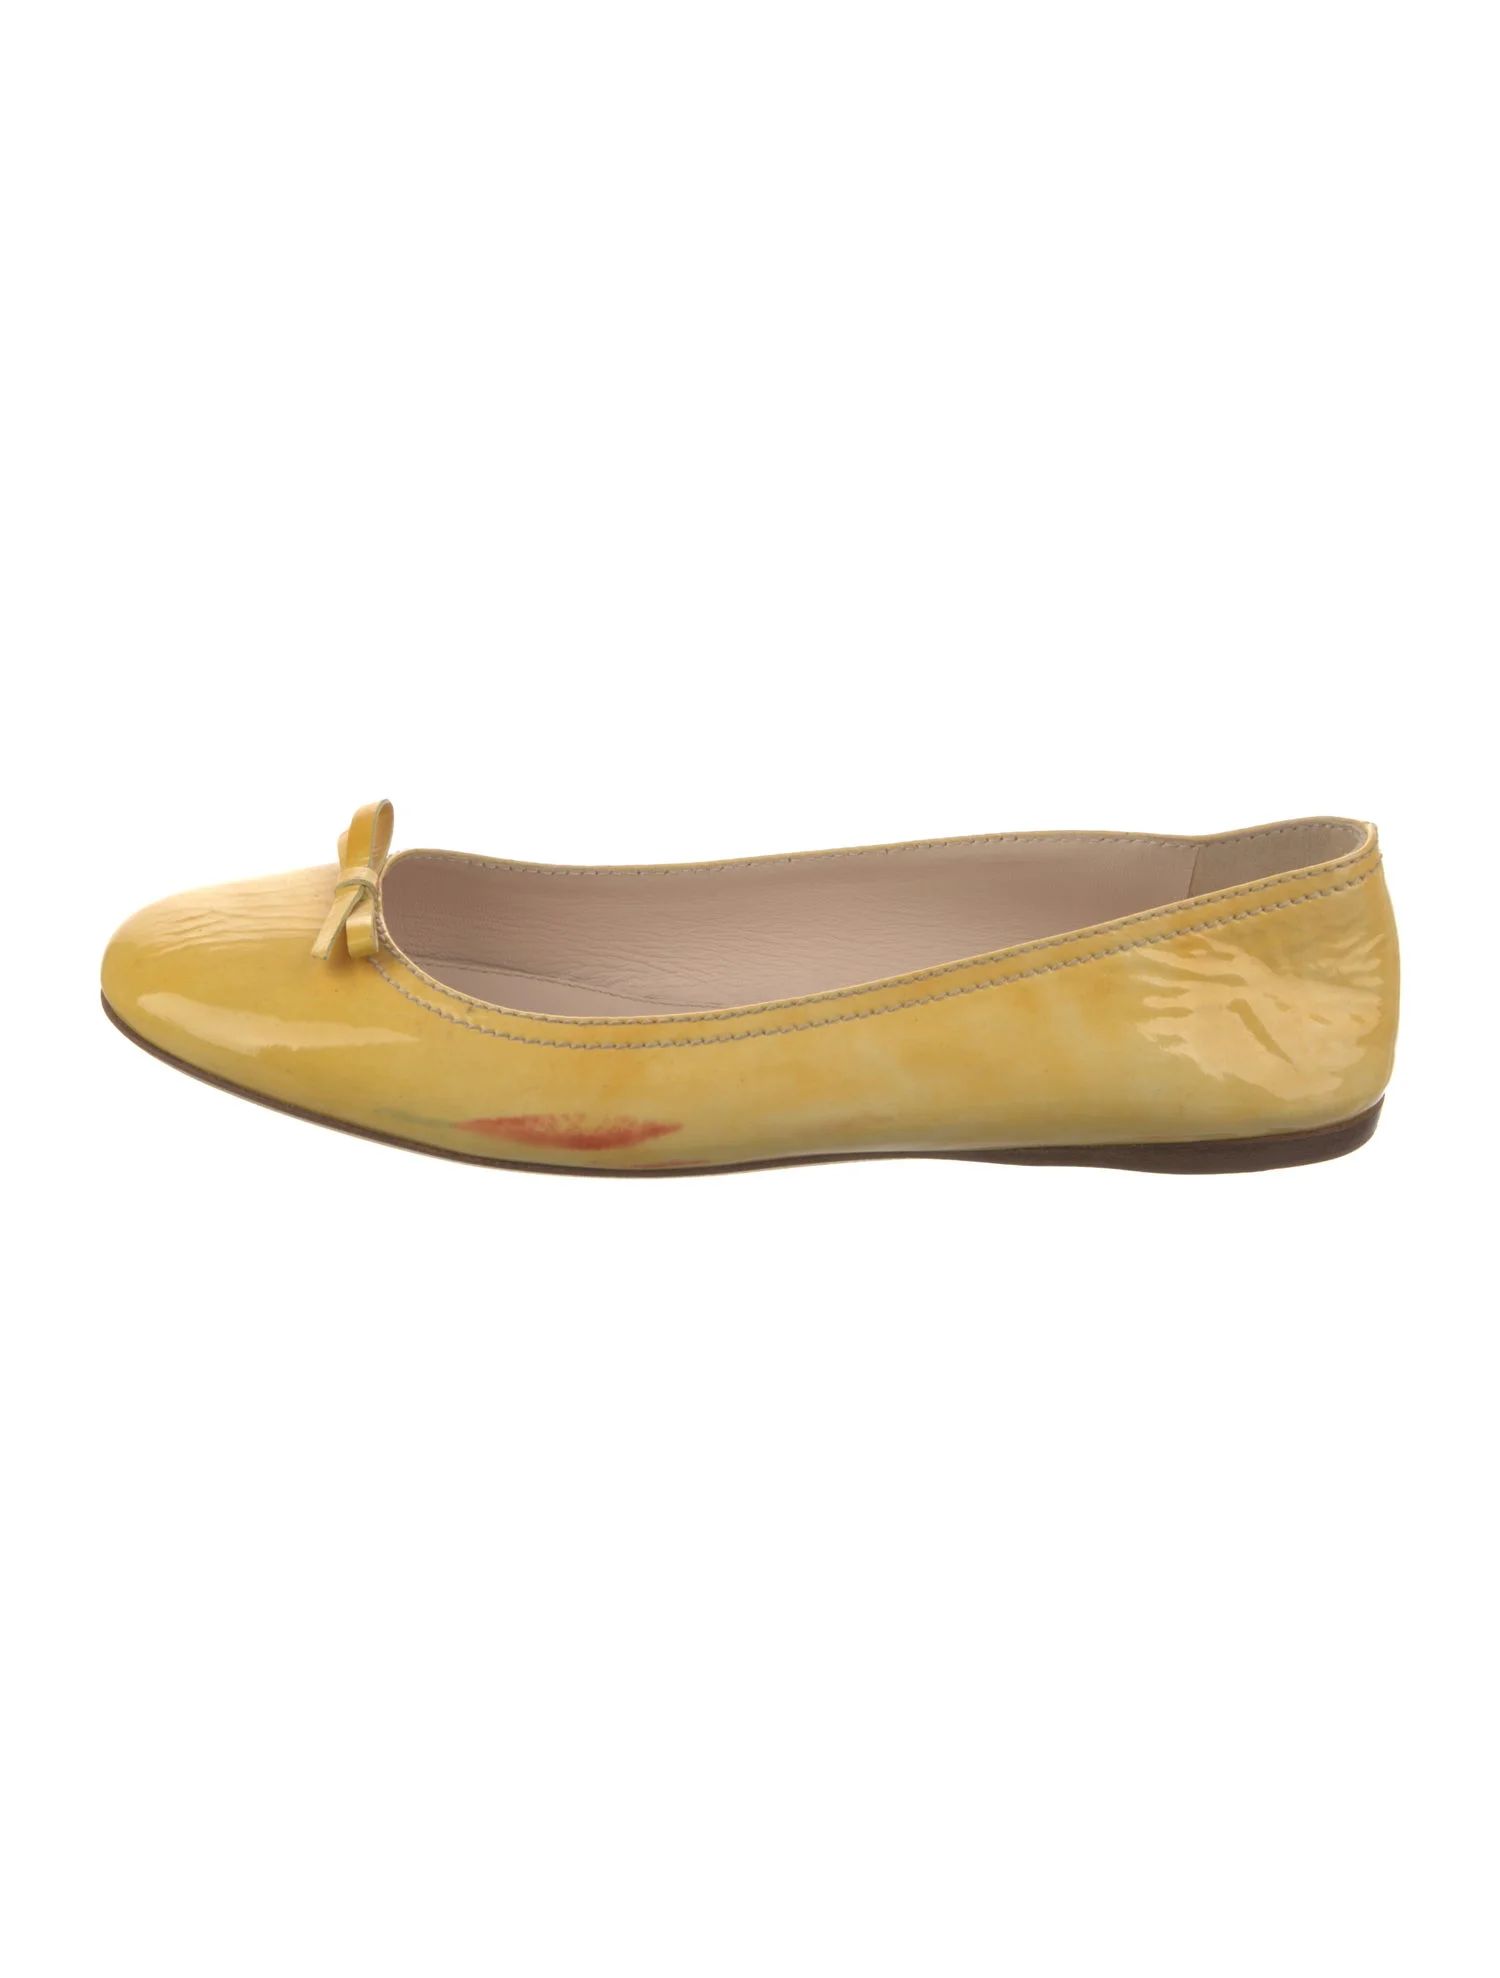 Prada Patent Leather Ballet Flats | The RealReal